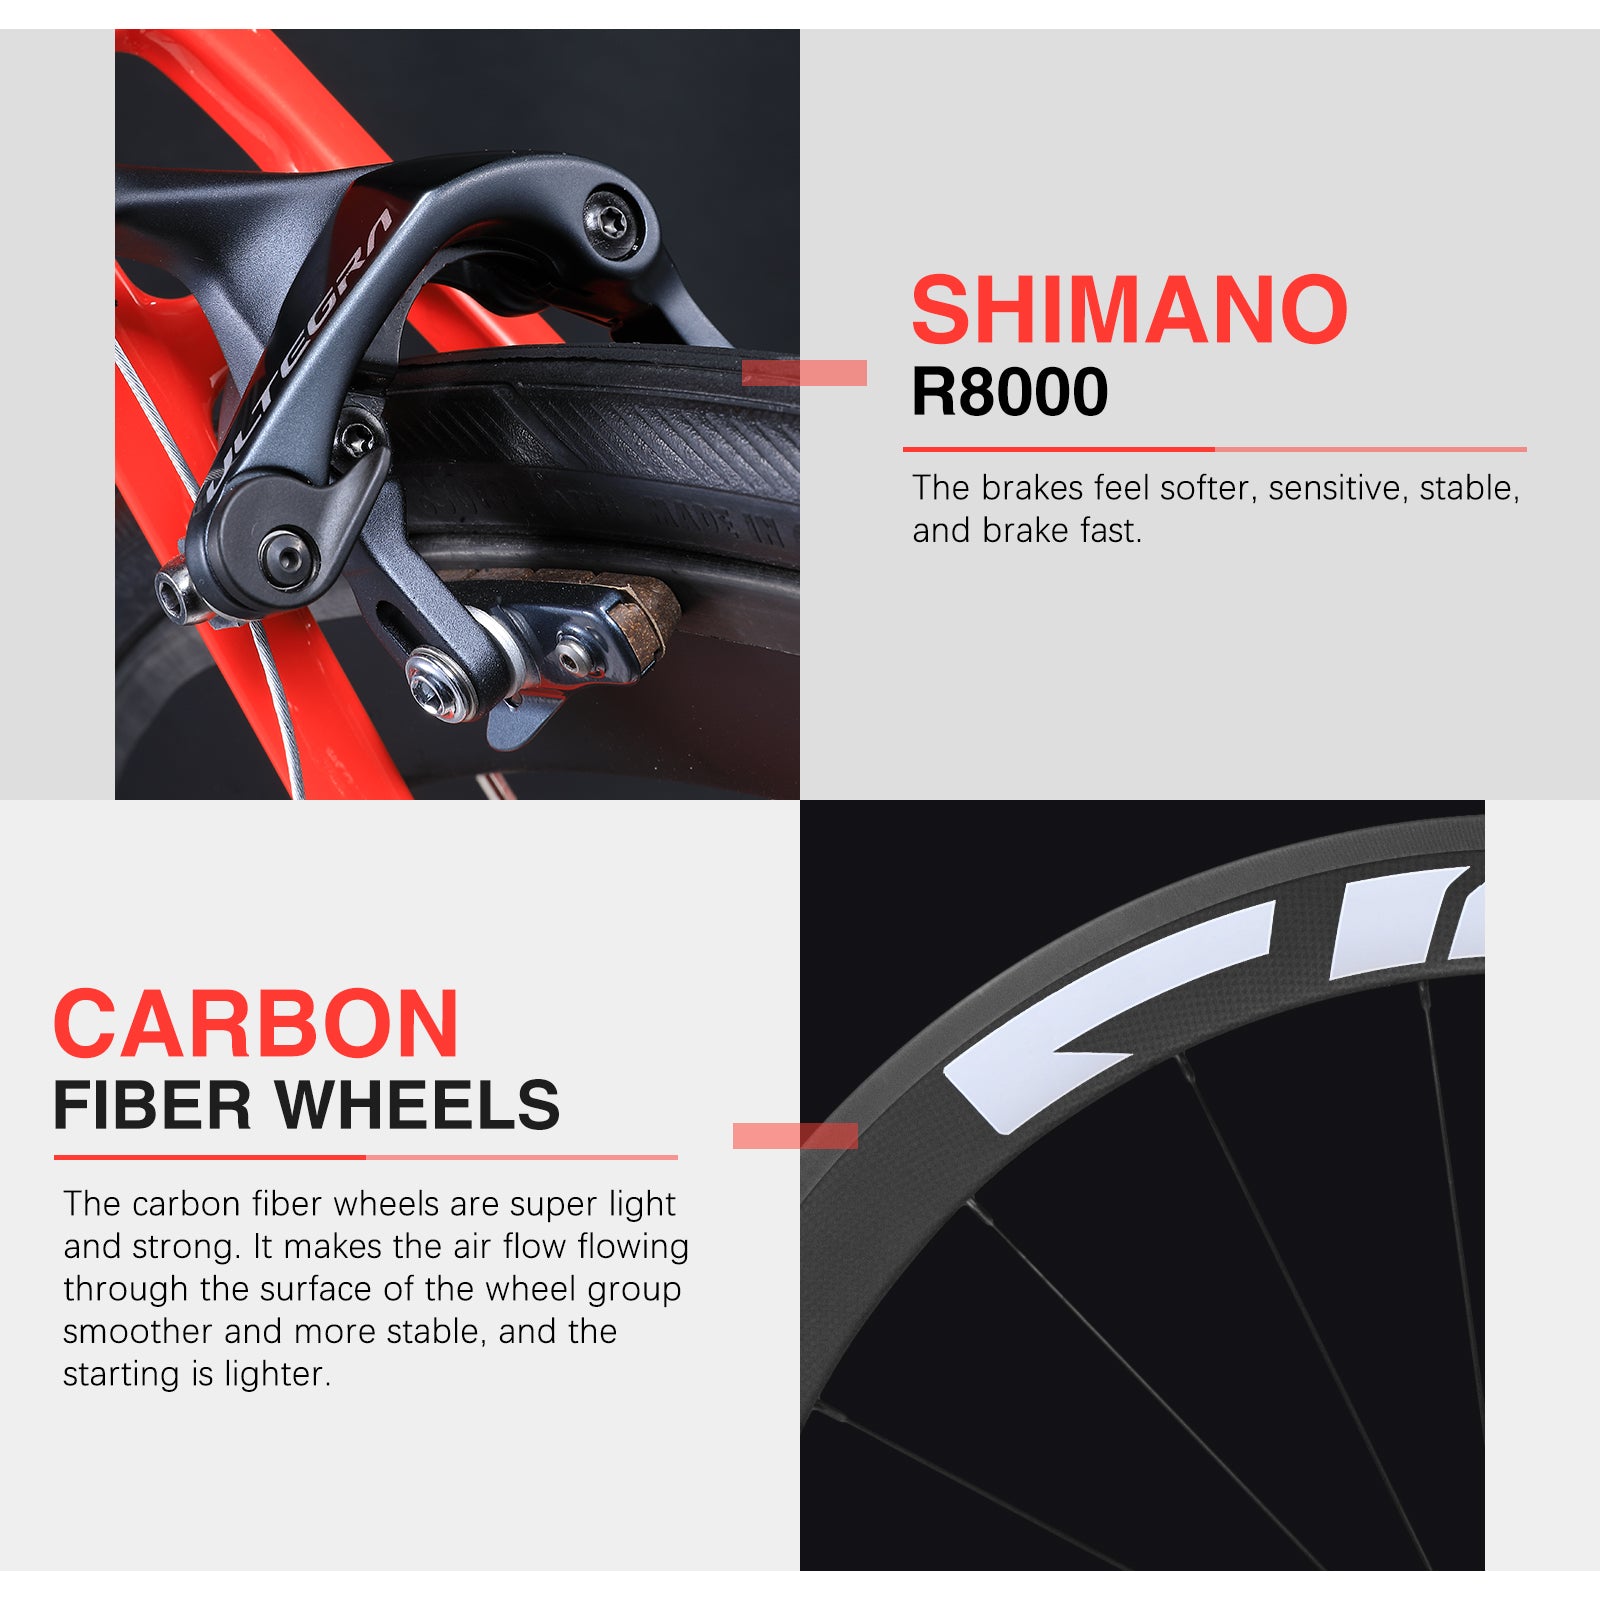 shimano r8000 v brake and carbon wheels-kootu r03 carbon road bike with shimano ultegra r8000 22speeed